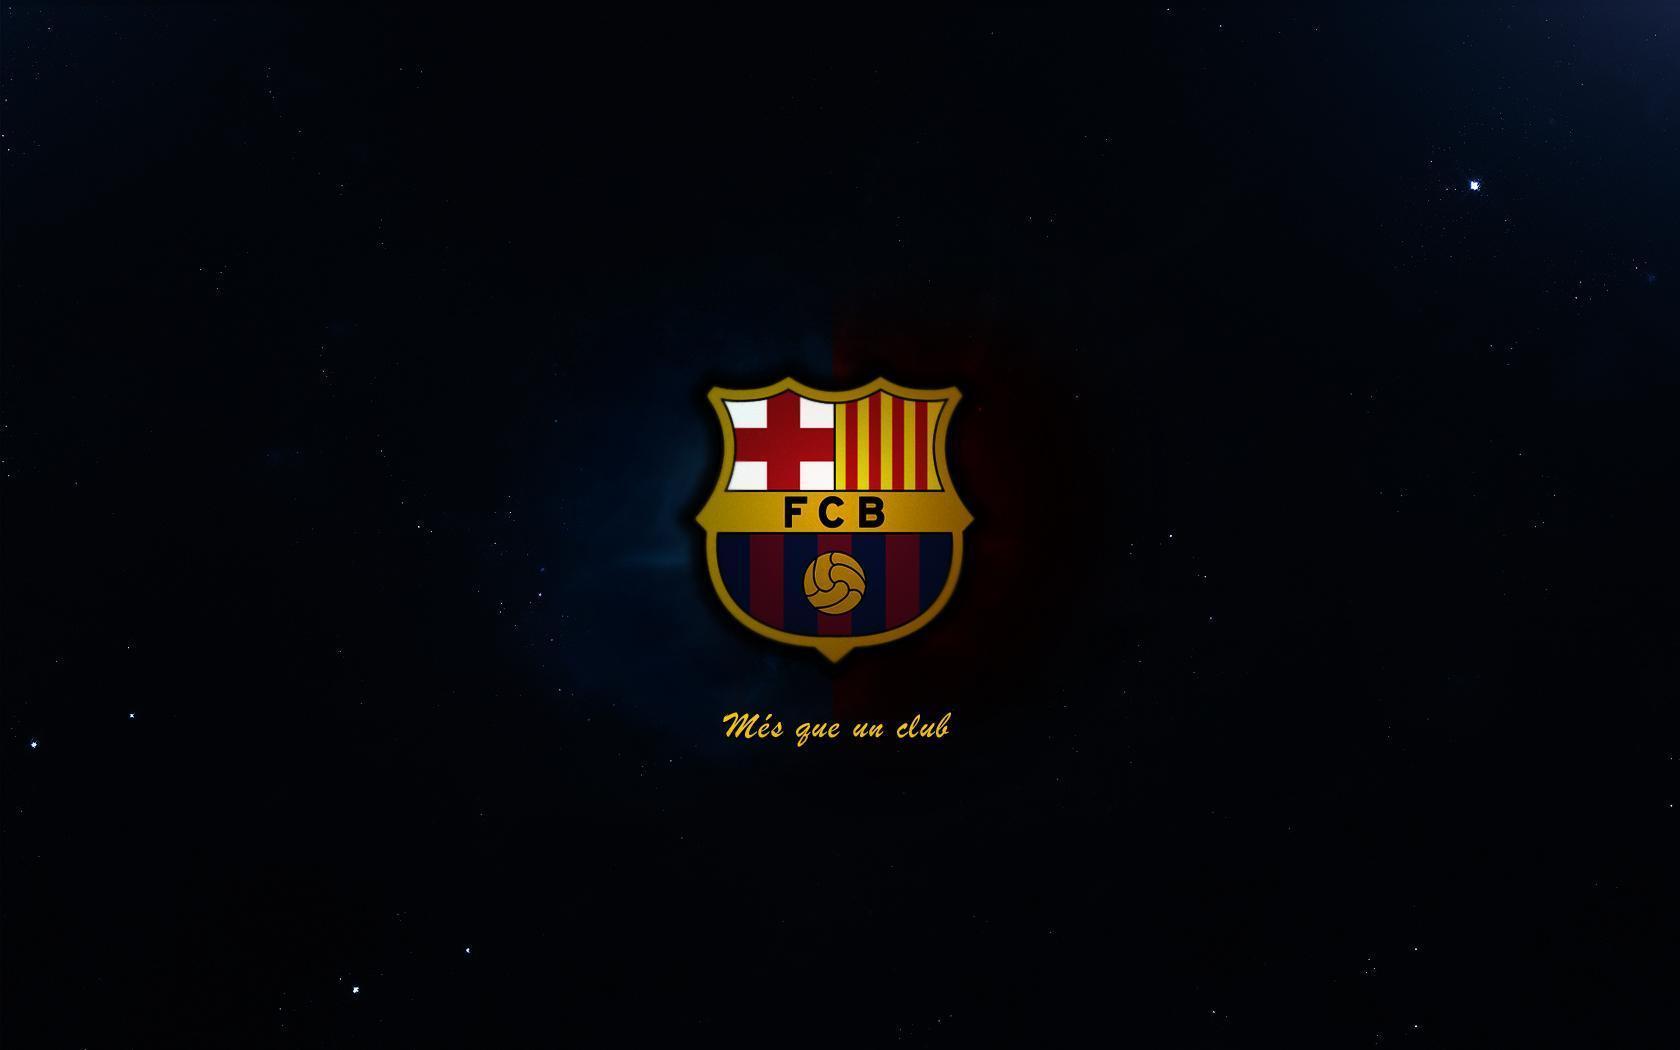 Fc Barcelona Wallpapers For Android 4479 Full HD Wallpapers Desktop